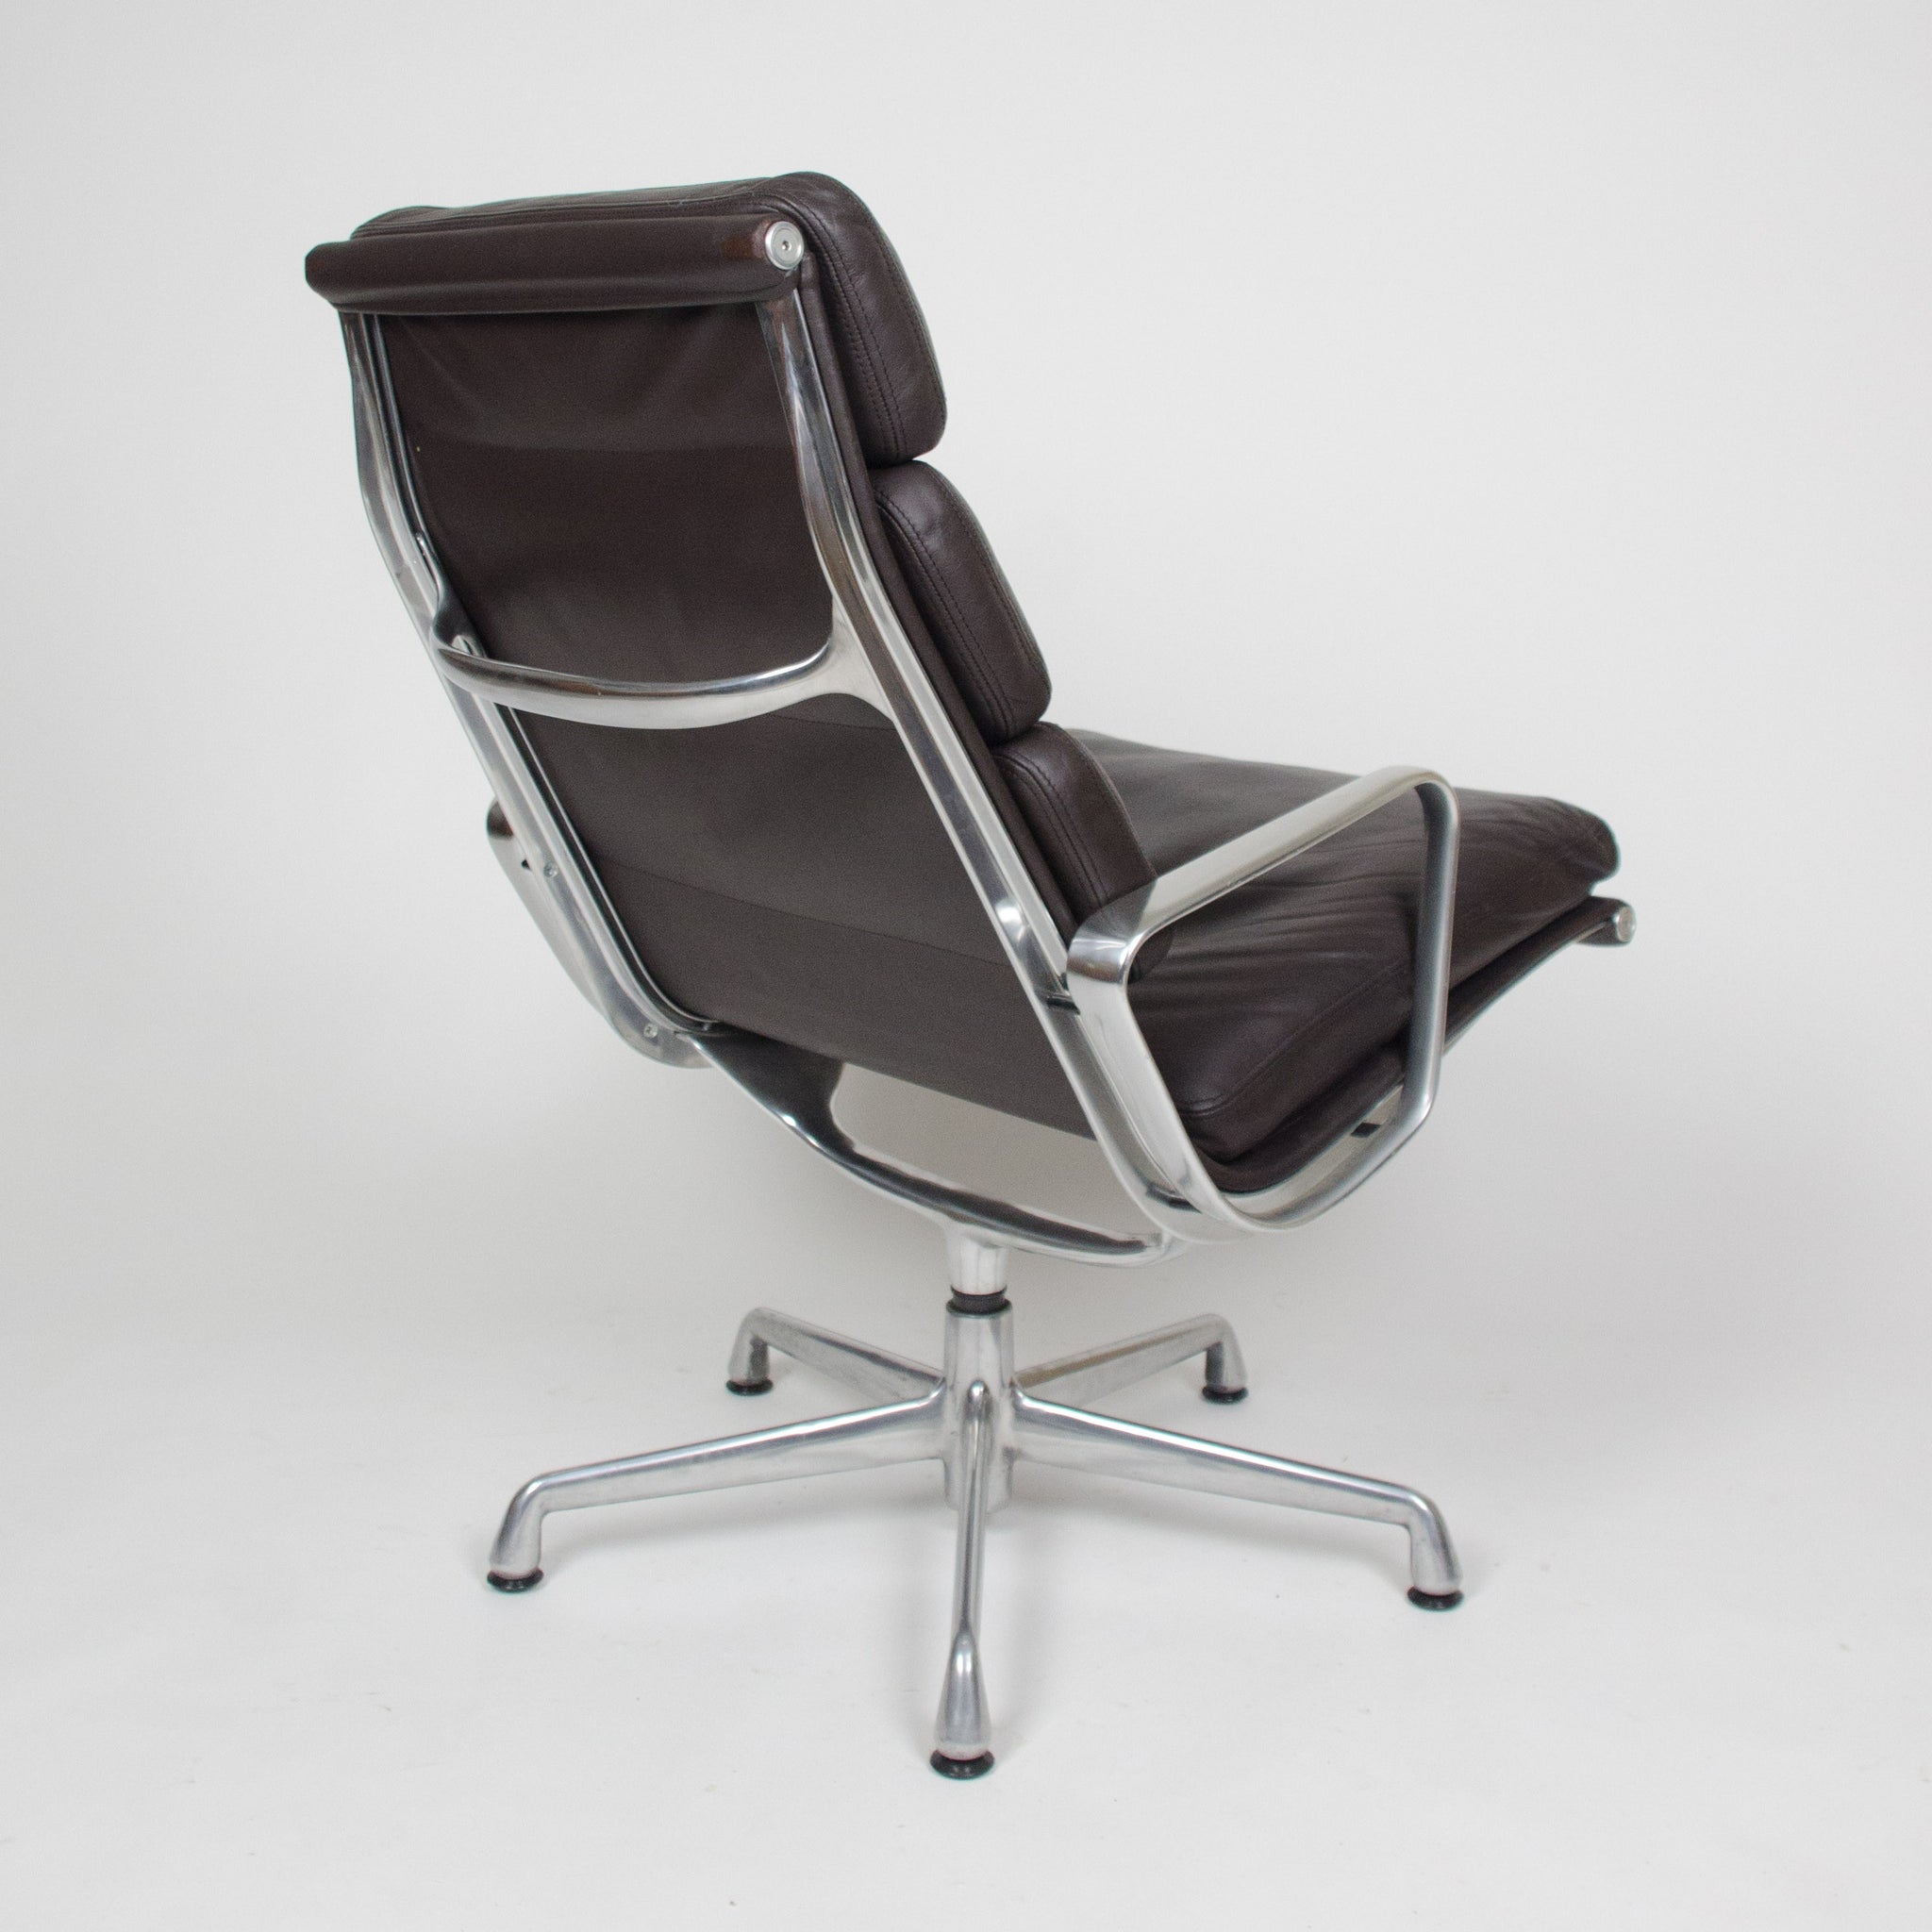 SOLD Eames Herman Miller Soft Pad Aluminum Group Lounge Chair Brown Leather